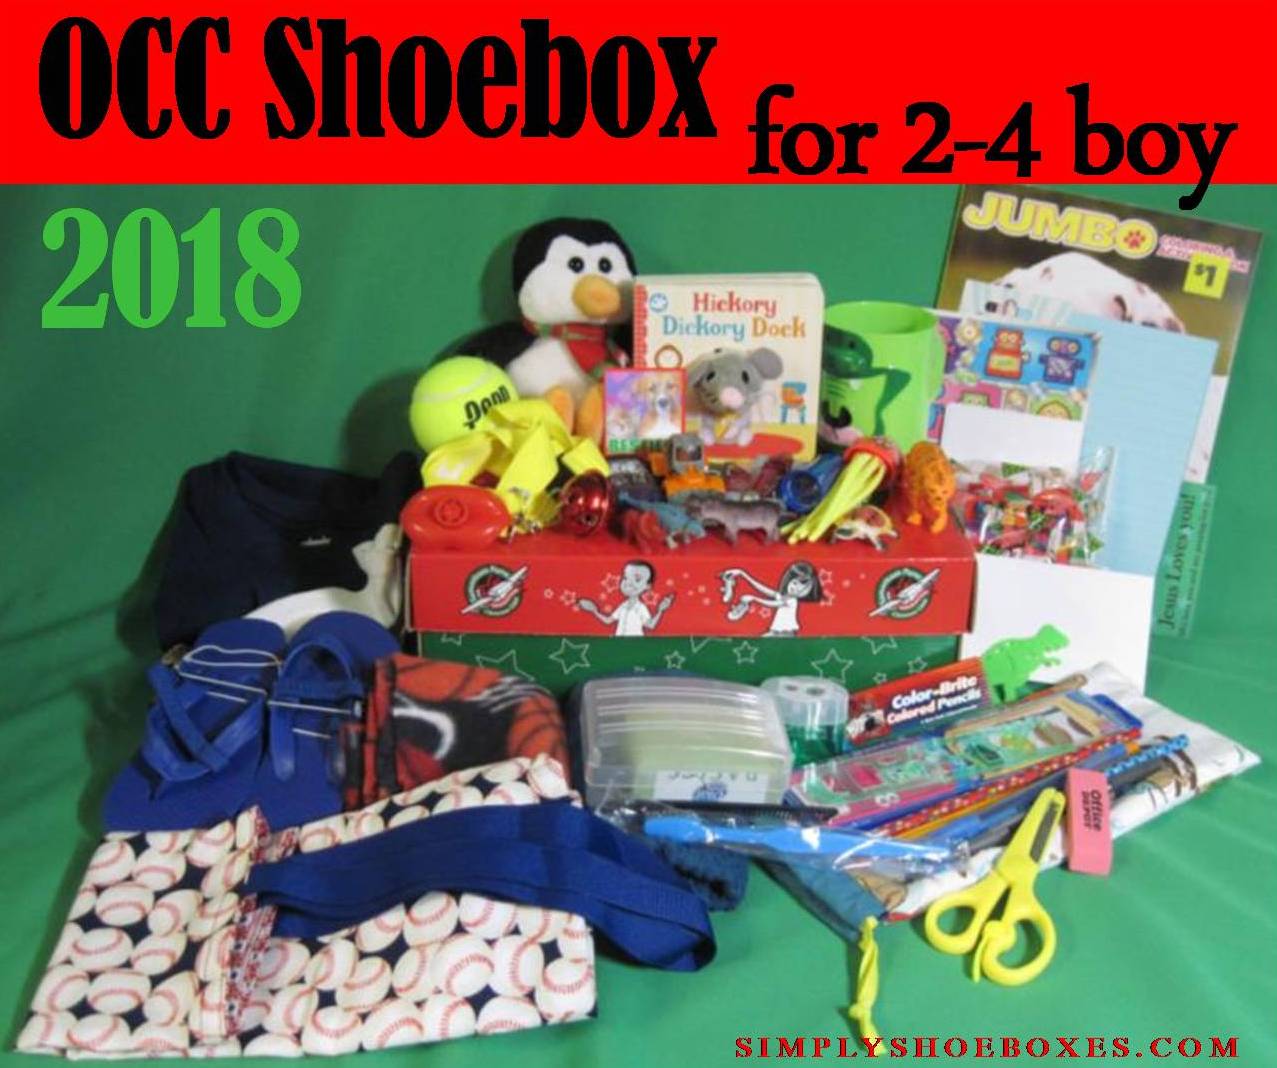 Simply Shoeboxes: Organizing Hat Crocheting Supplies for Operation  Christmas Child Shoebox Packing Party